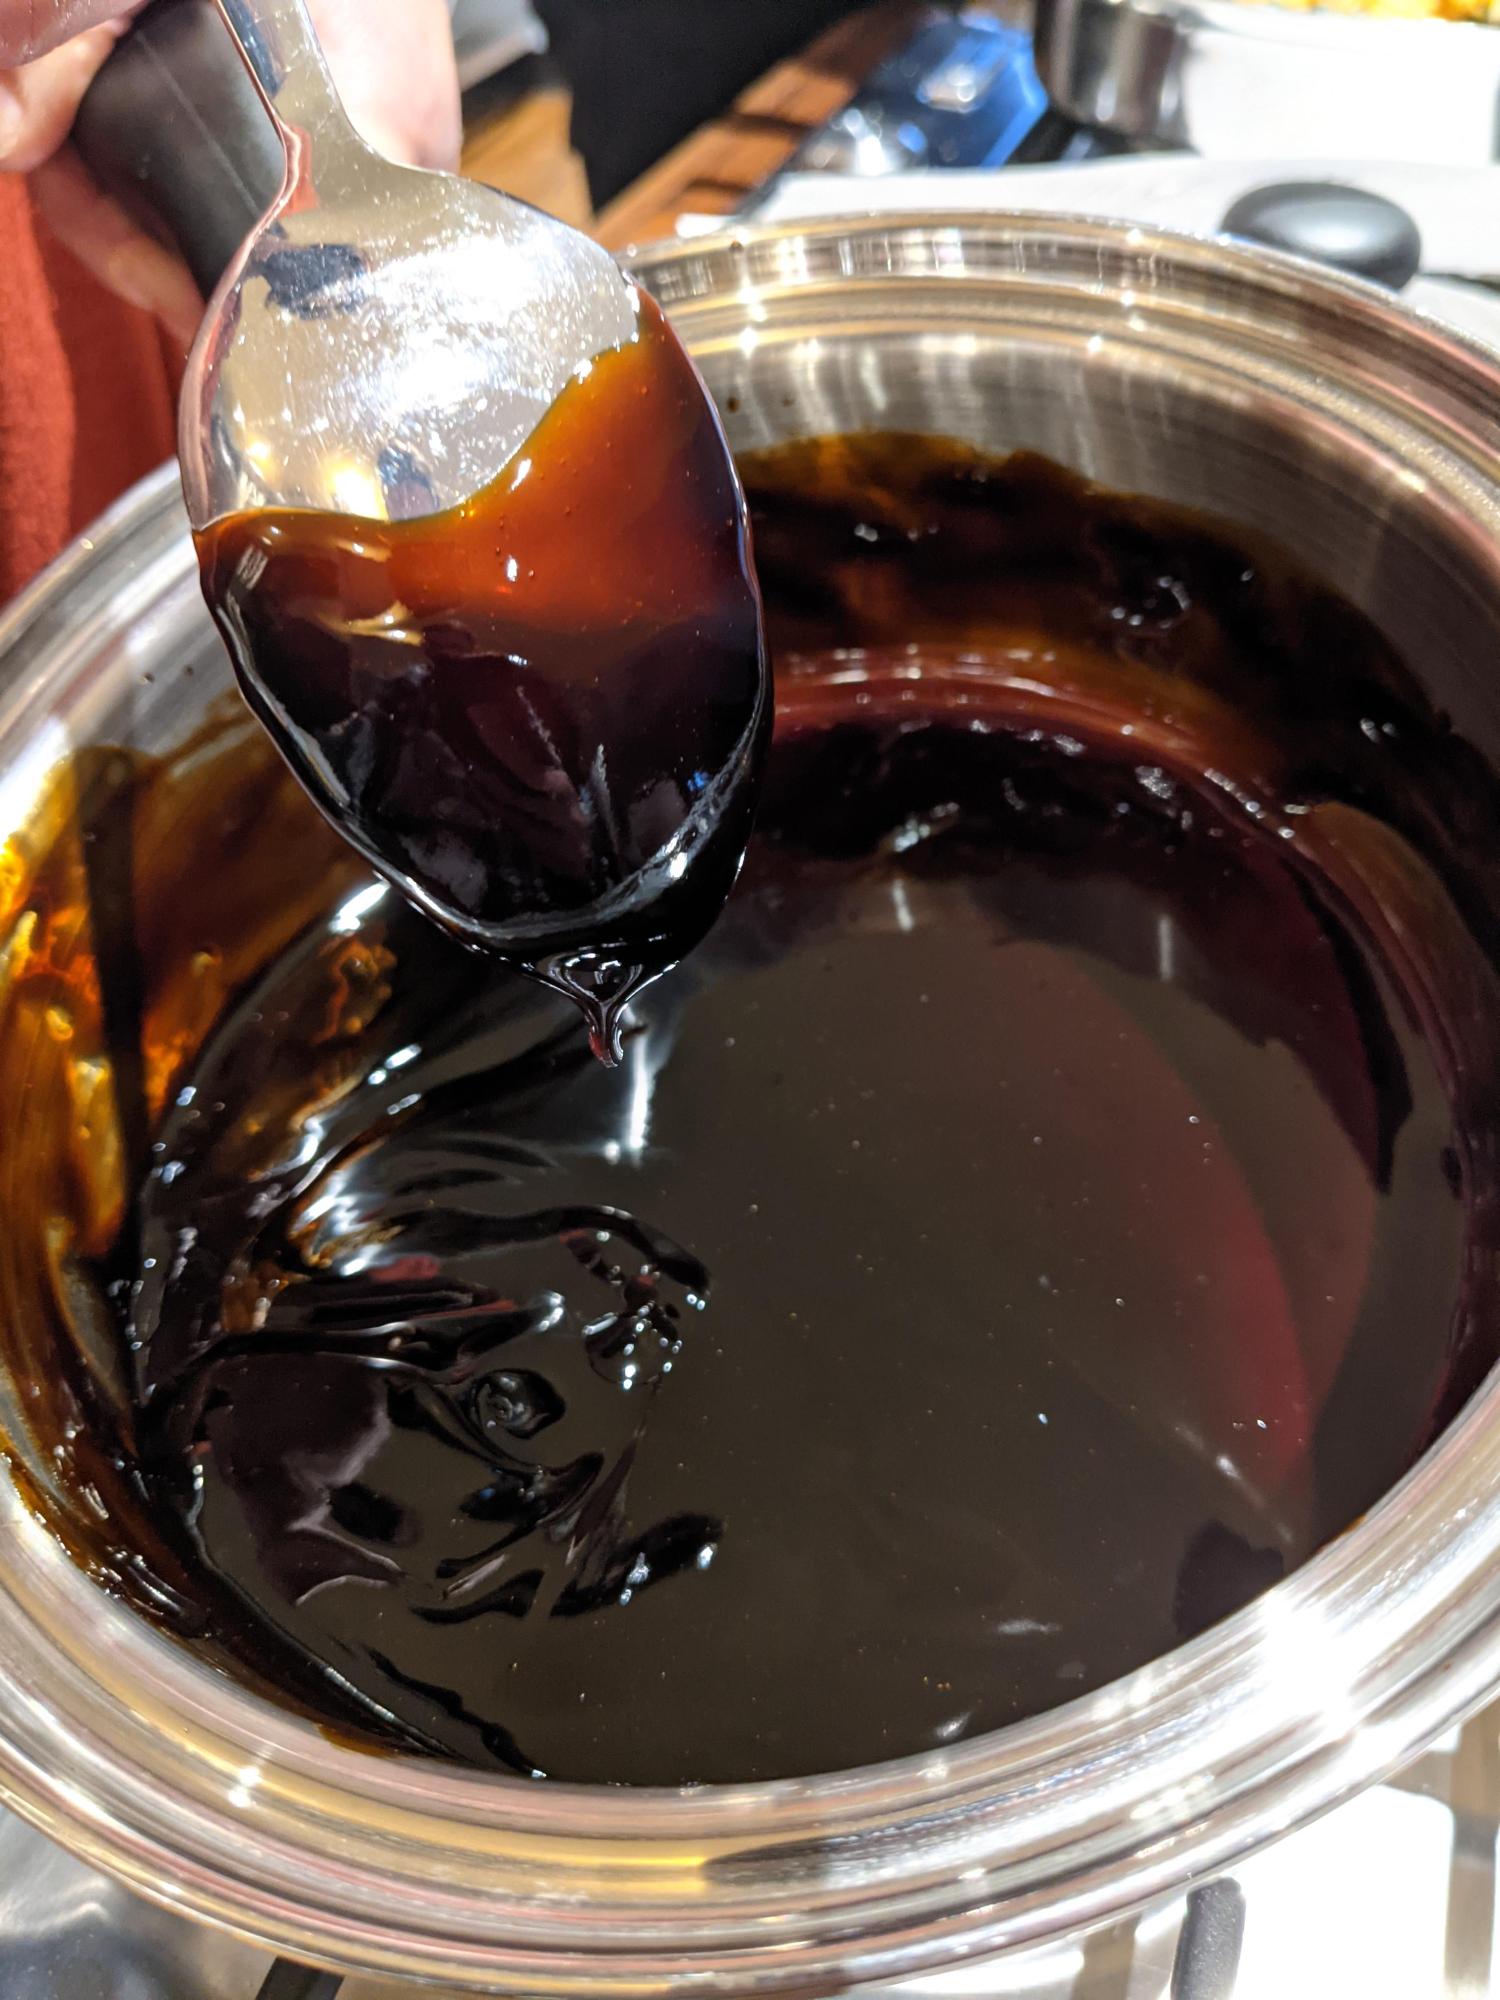 Balsamic reduction coating a spoon.